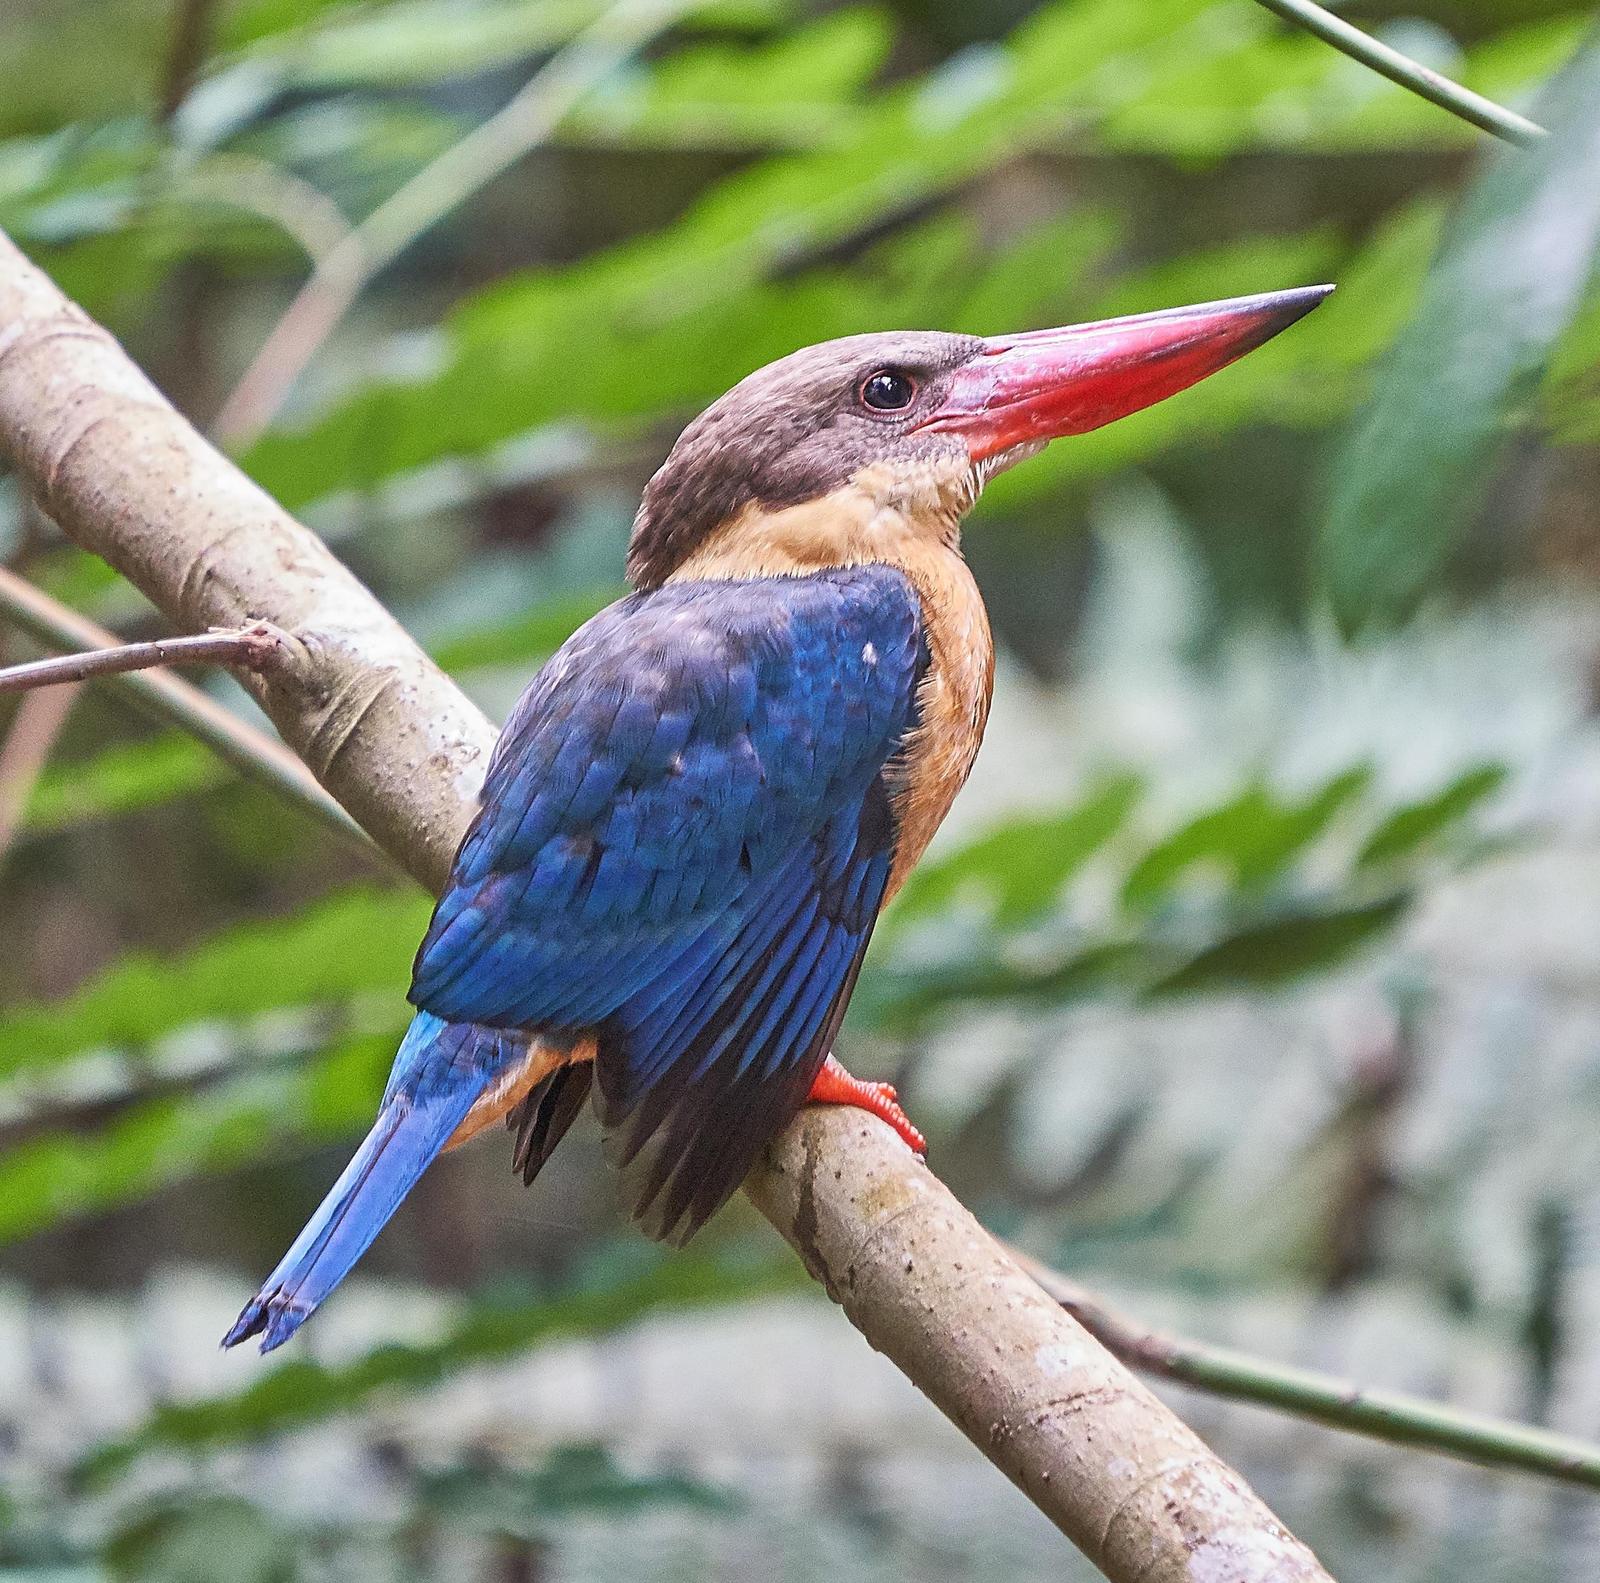 Stork-billed Kingfisher Photo by Steven Cheong